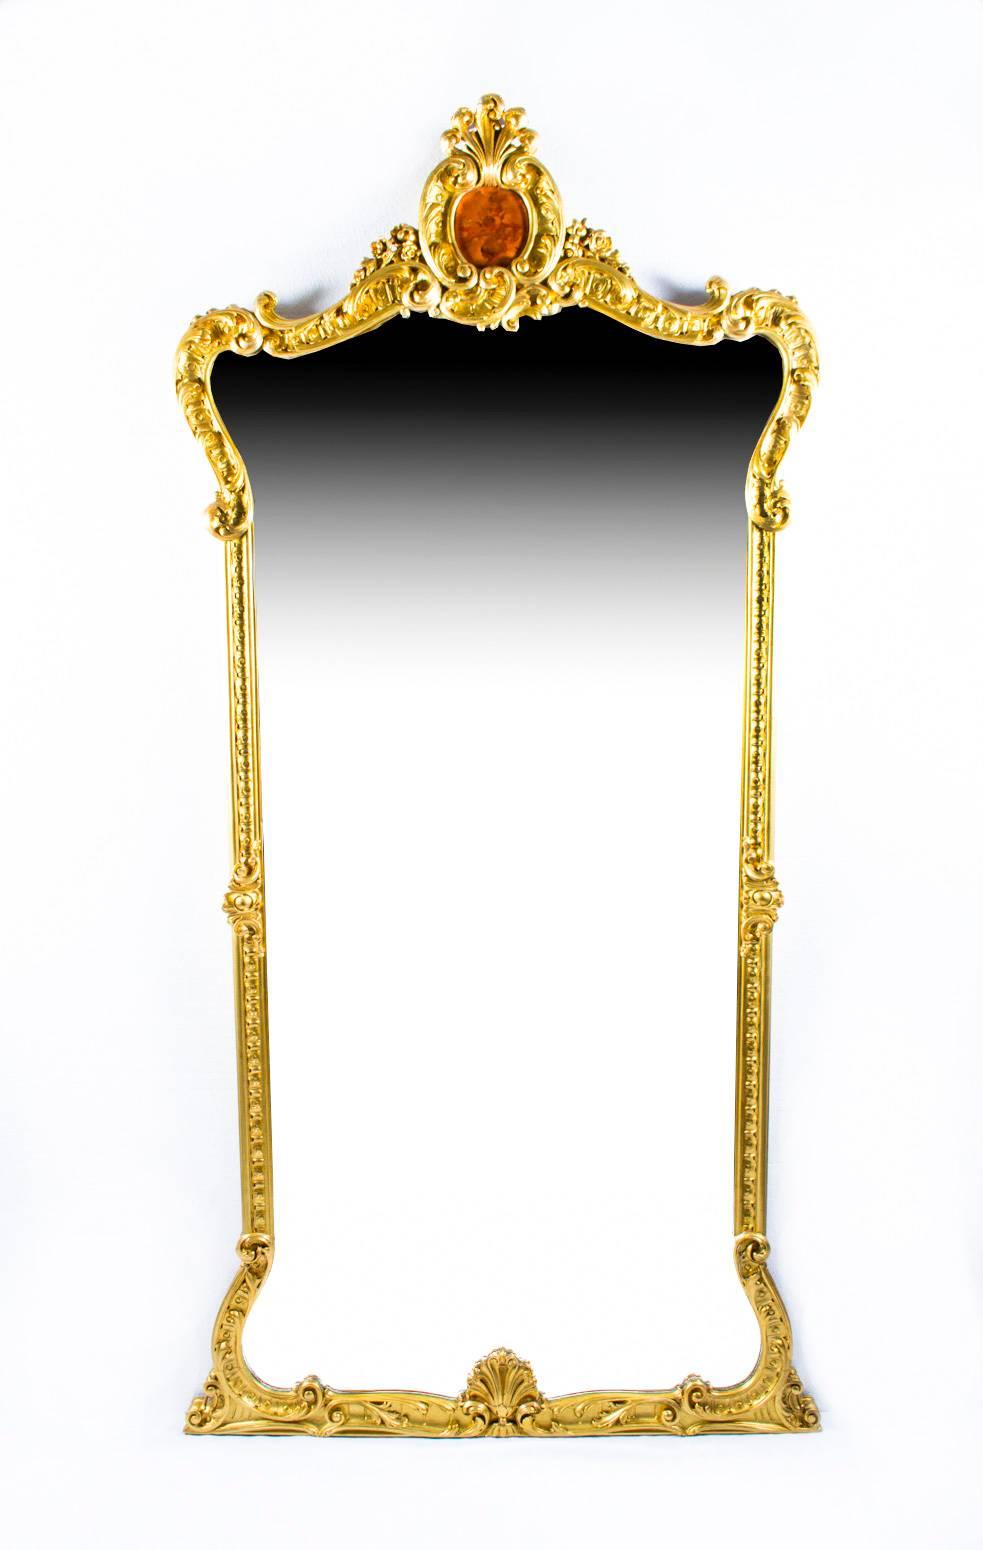 This is a monumental pair of 2.5 metre high antique Louis XV style French giltwood pier mirrors with stunning hand-carved floral decoration, circa 1890 in date.

The arched mirror plates are elegantly framed by hand-carved 'C'-scroll corners with